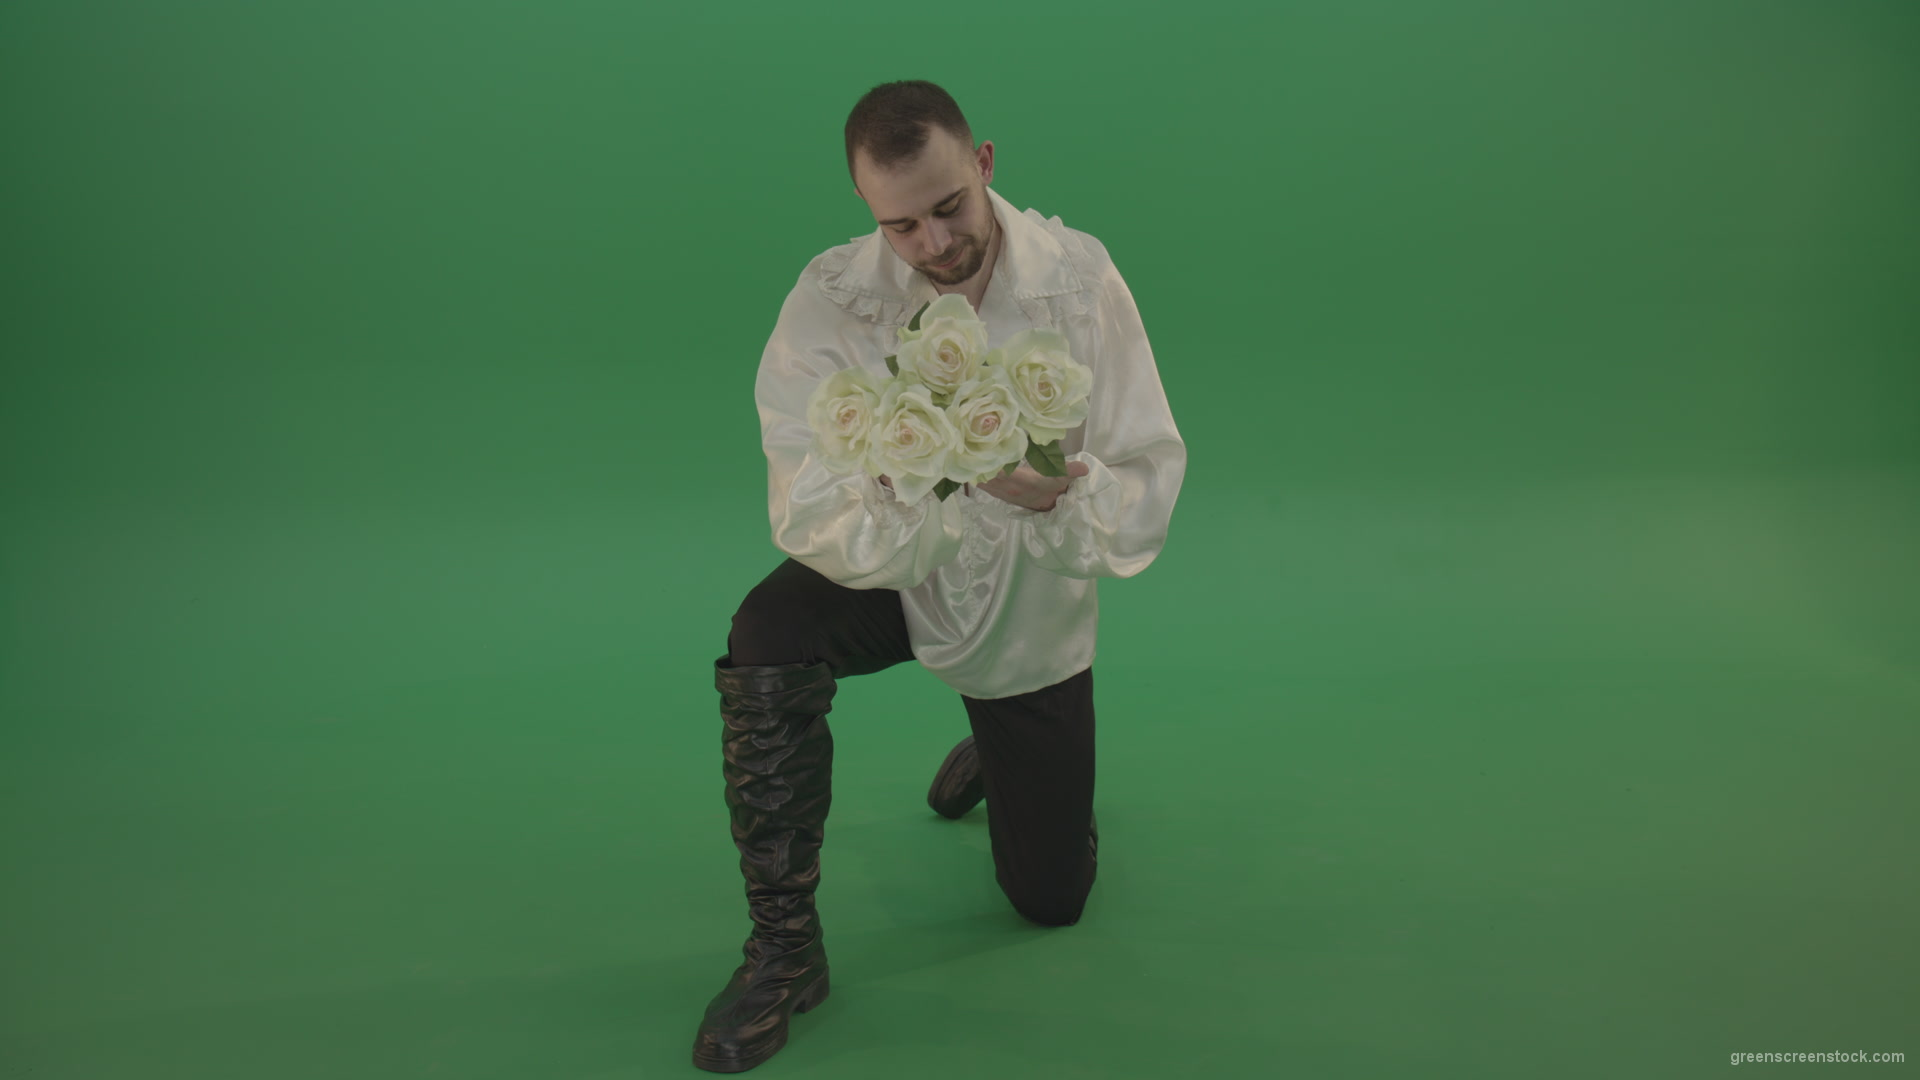 Medieval-man-gives-white-flowers-standing-on-one-knee-isolated-in-green-screen-studio_008 Green Screen Stock